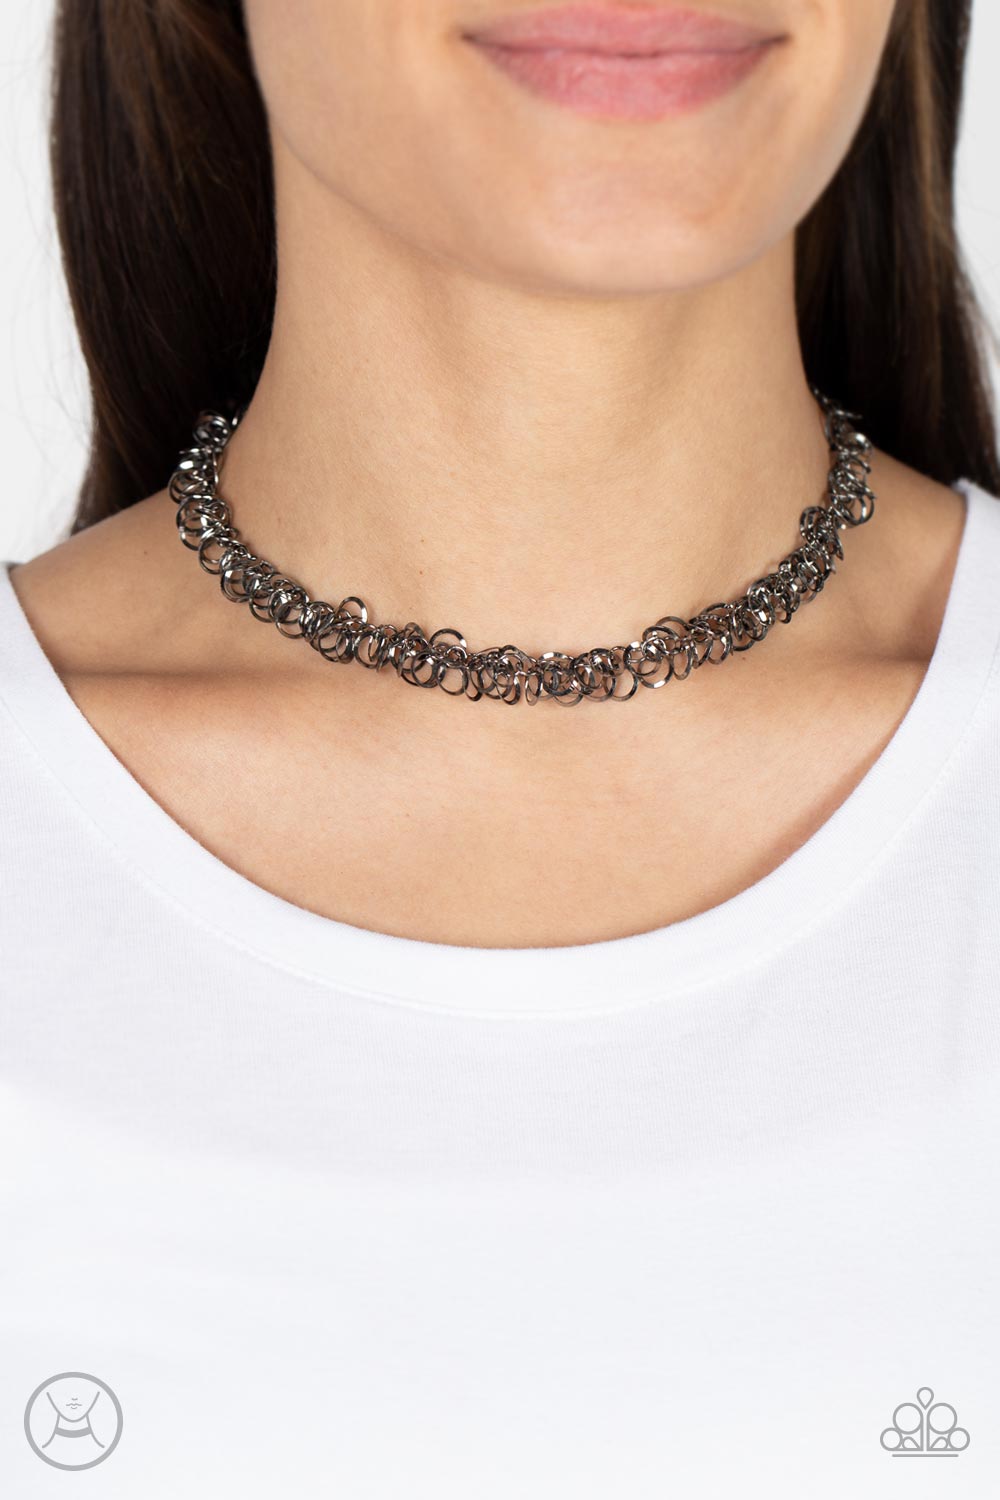 Paparazzi Accessories: Cause a Commotion - Black Choker Necklace